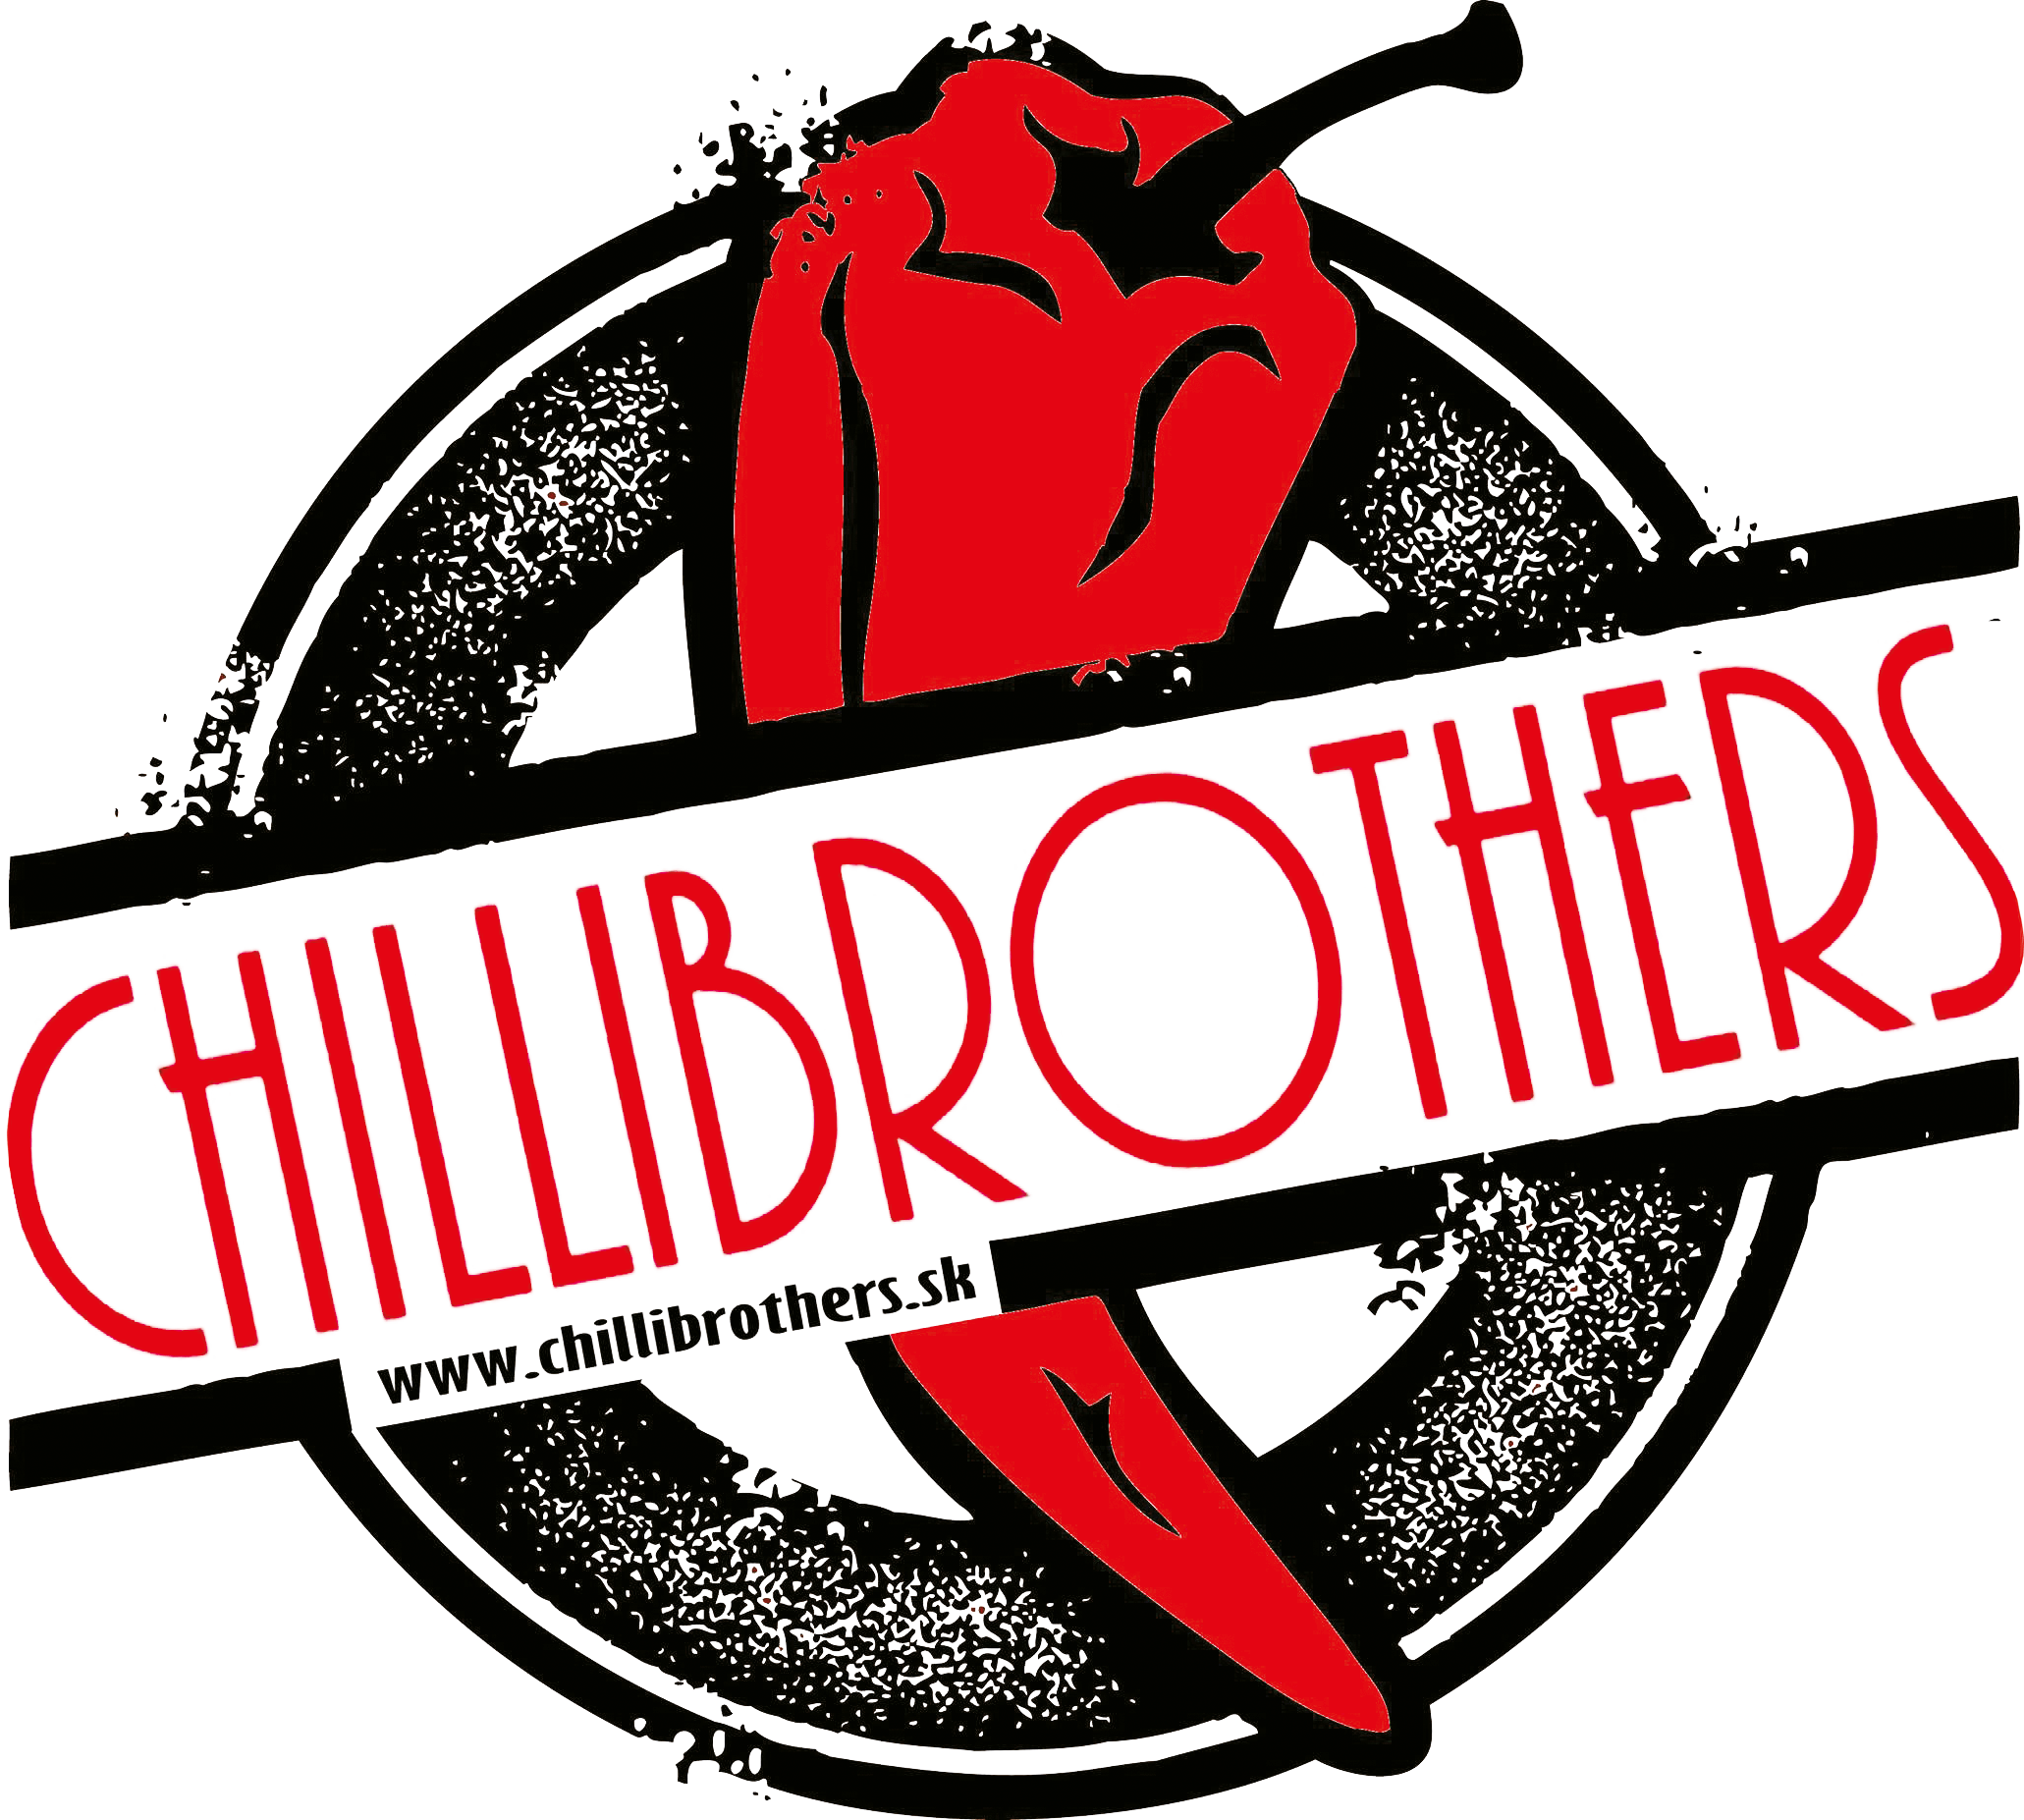 Chillibrothers